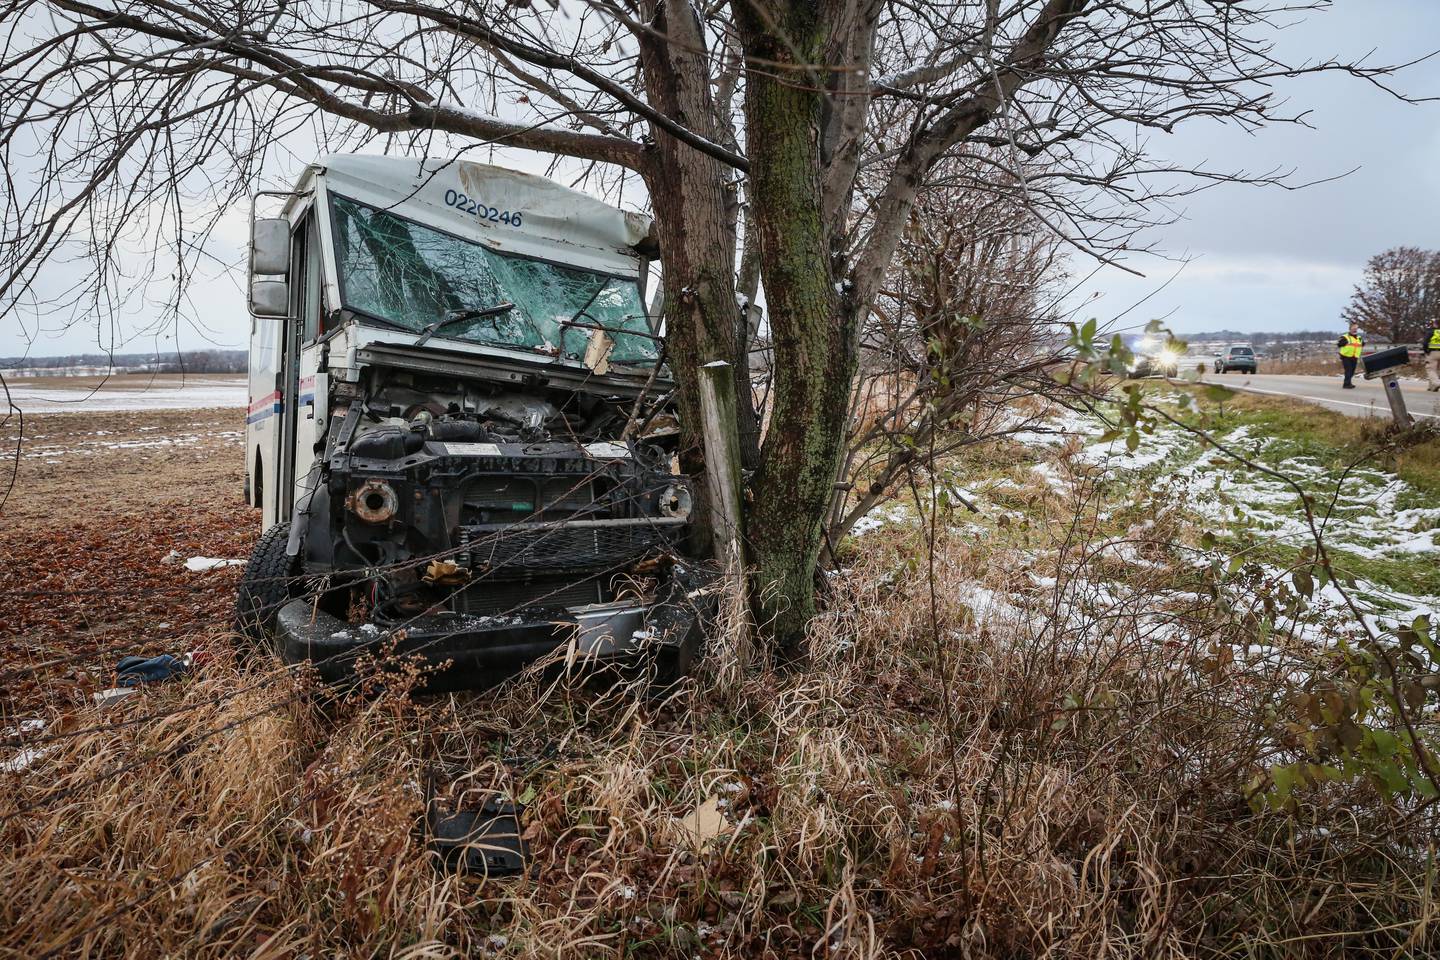 A U.S. Postal Service driver was seriously injured following a crash Wednesday, Nov. 16, 2022, where her postal truck struck a tree in the 16400 block of McGuire Road east of Harvard, a Harvard Fire Protection District spokesman said.